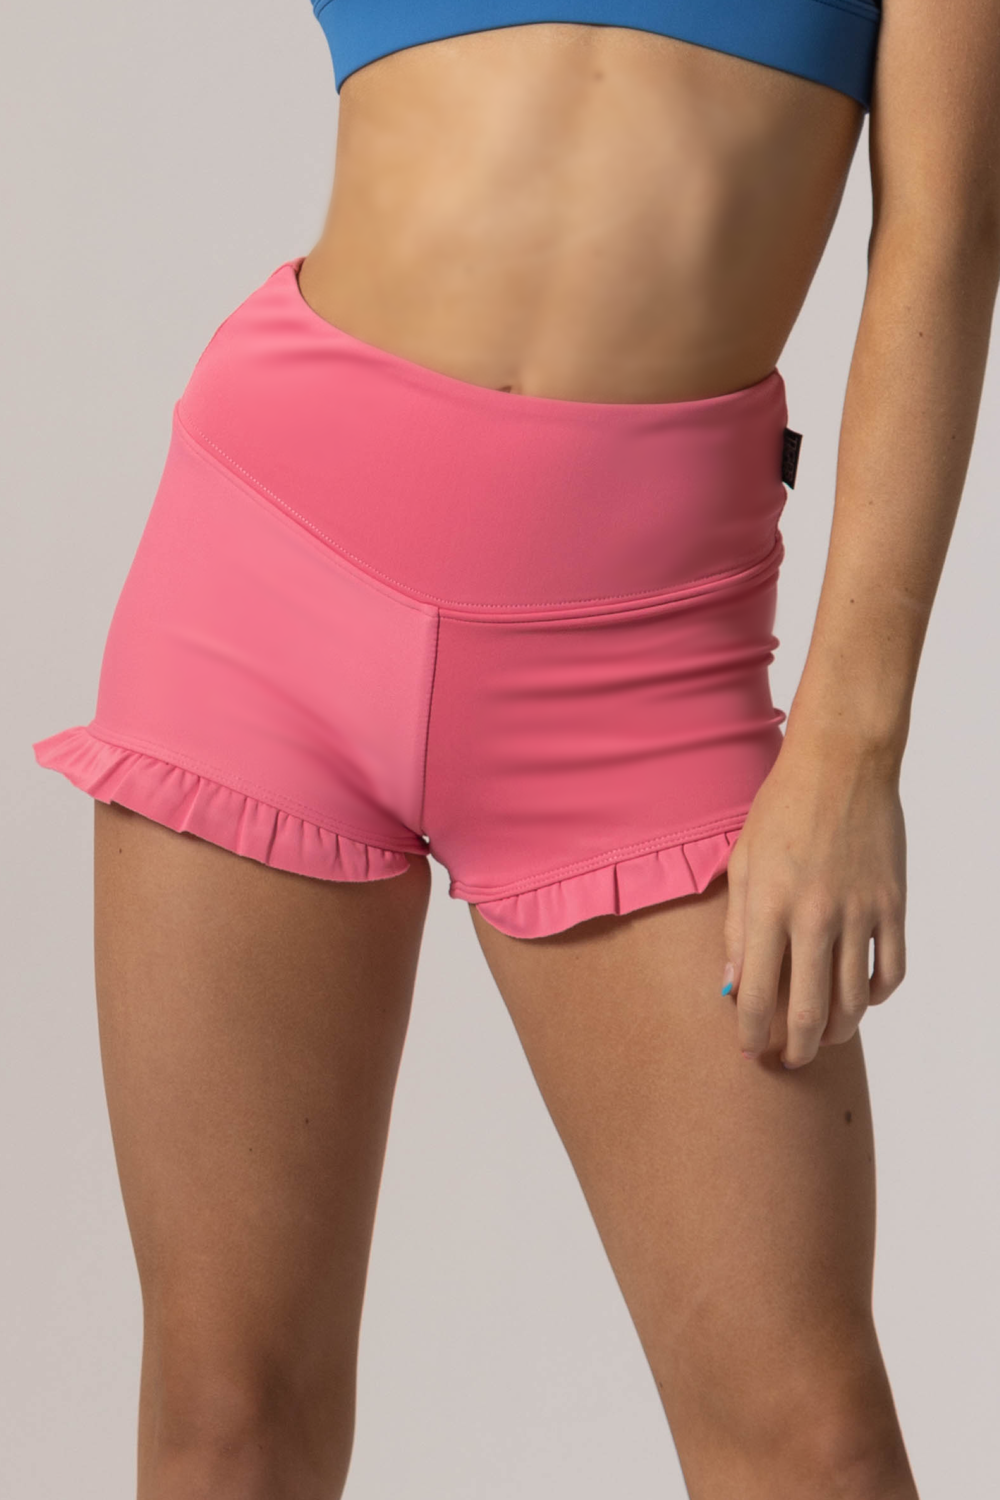 Tiger Friday Online Shop for Filly Bootie Shorts - Flamingo Dancewear - View : 2